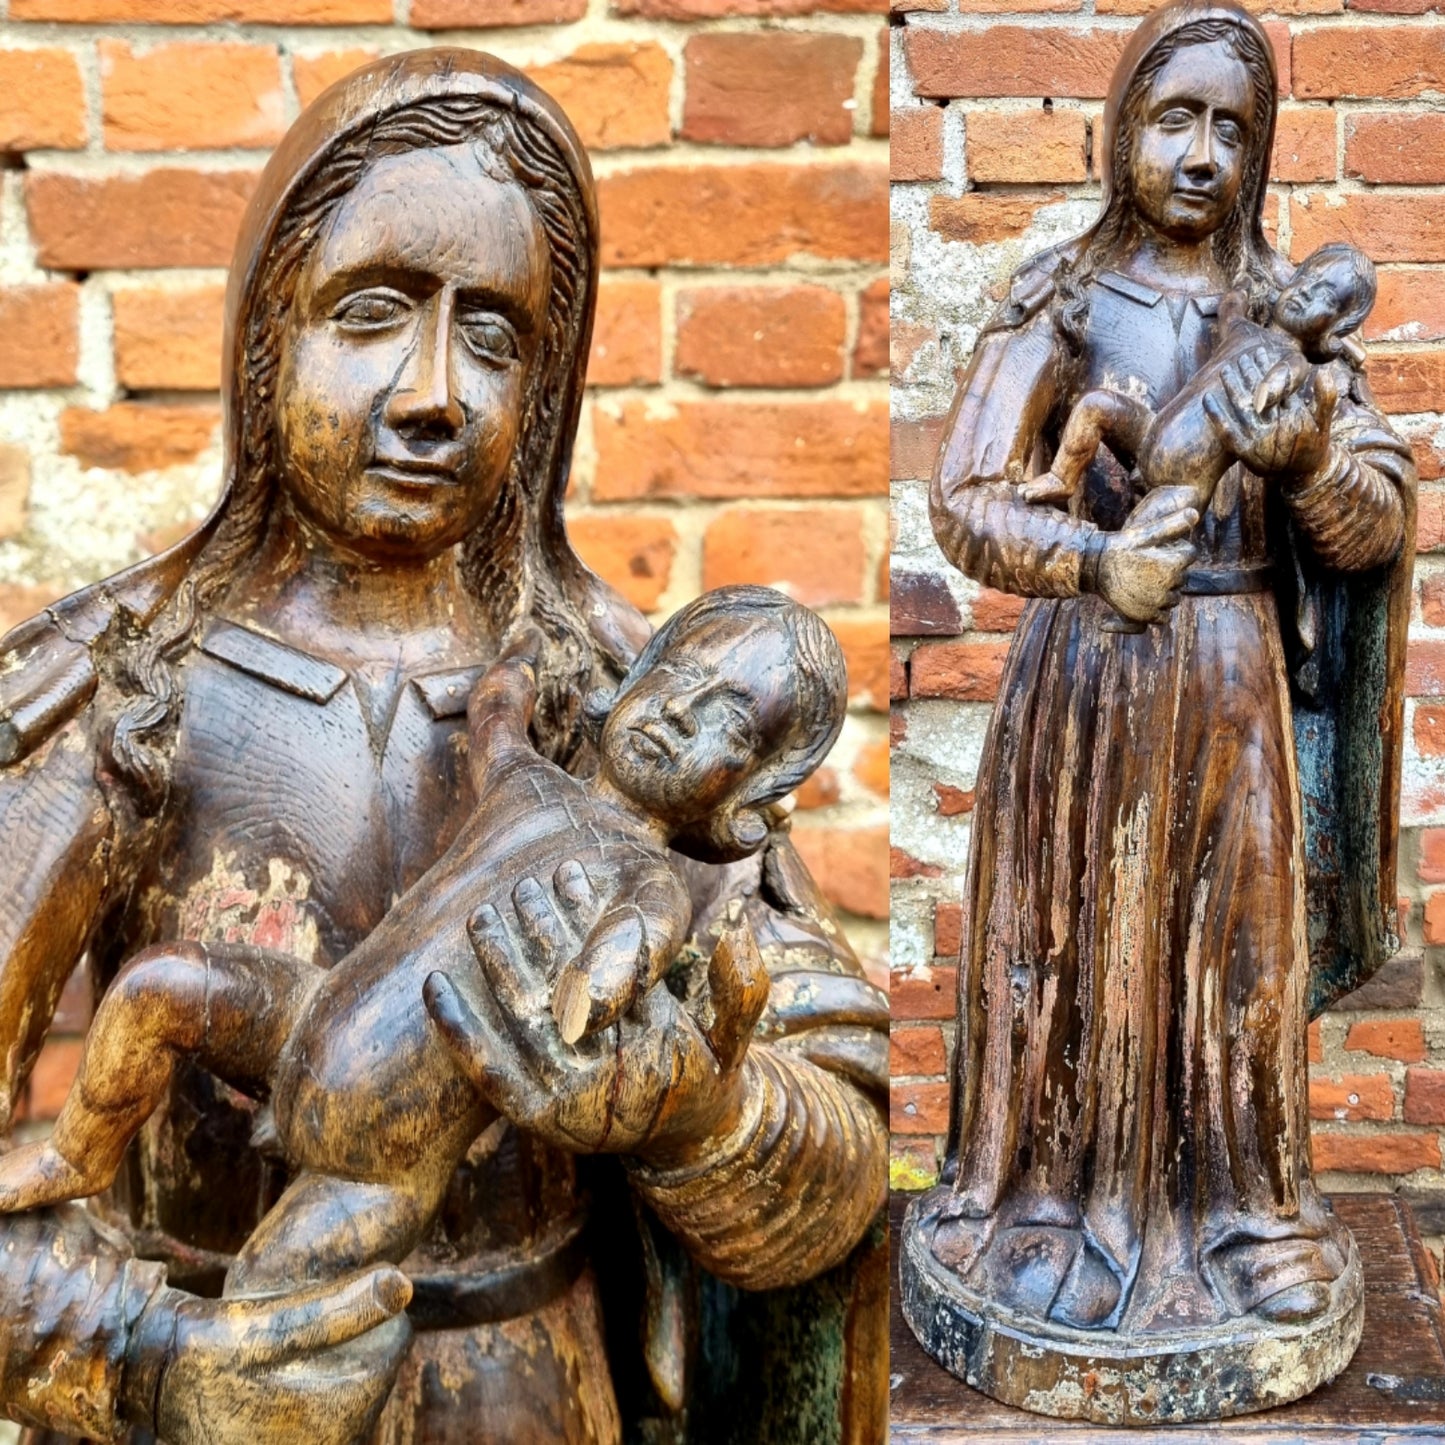 Large & Impressive Early 17th Century Antique Carved Walnut Sculpture of the Madonna & Child